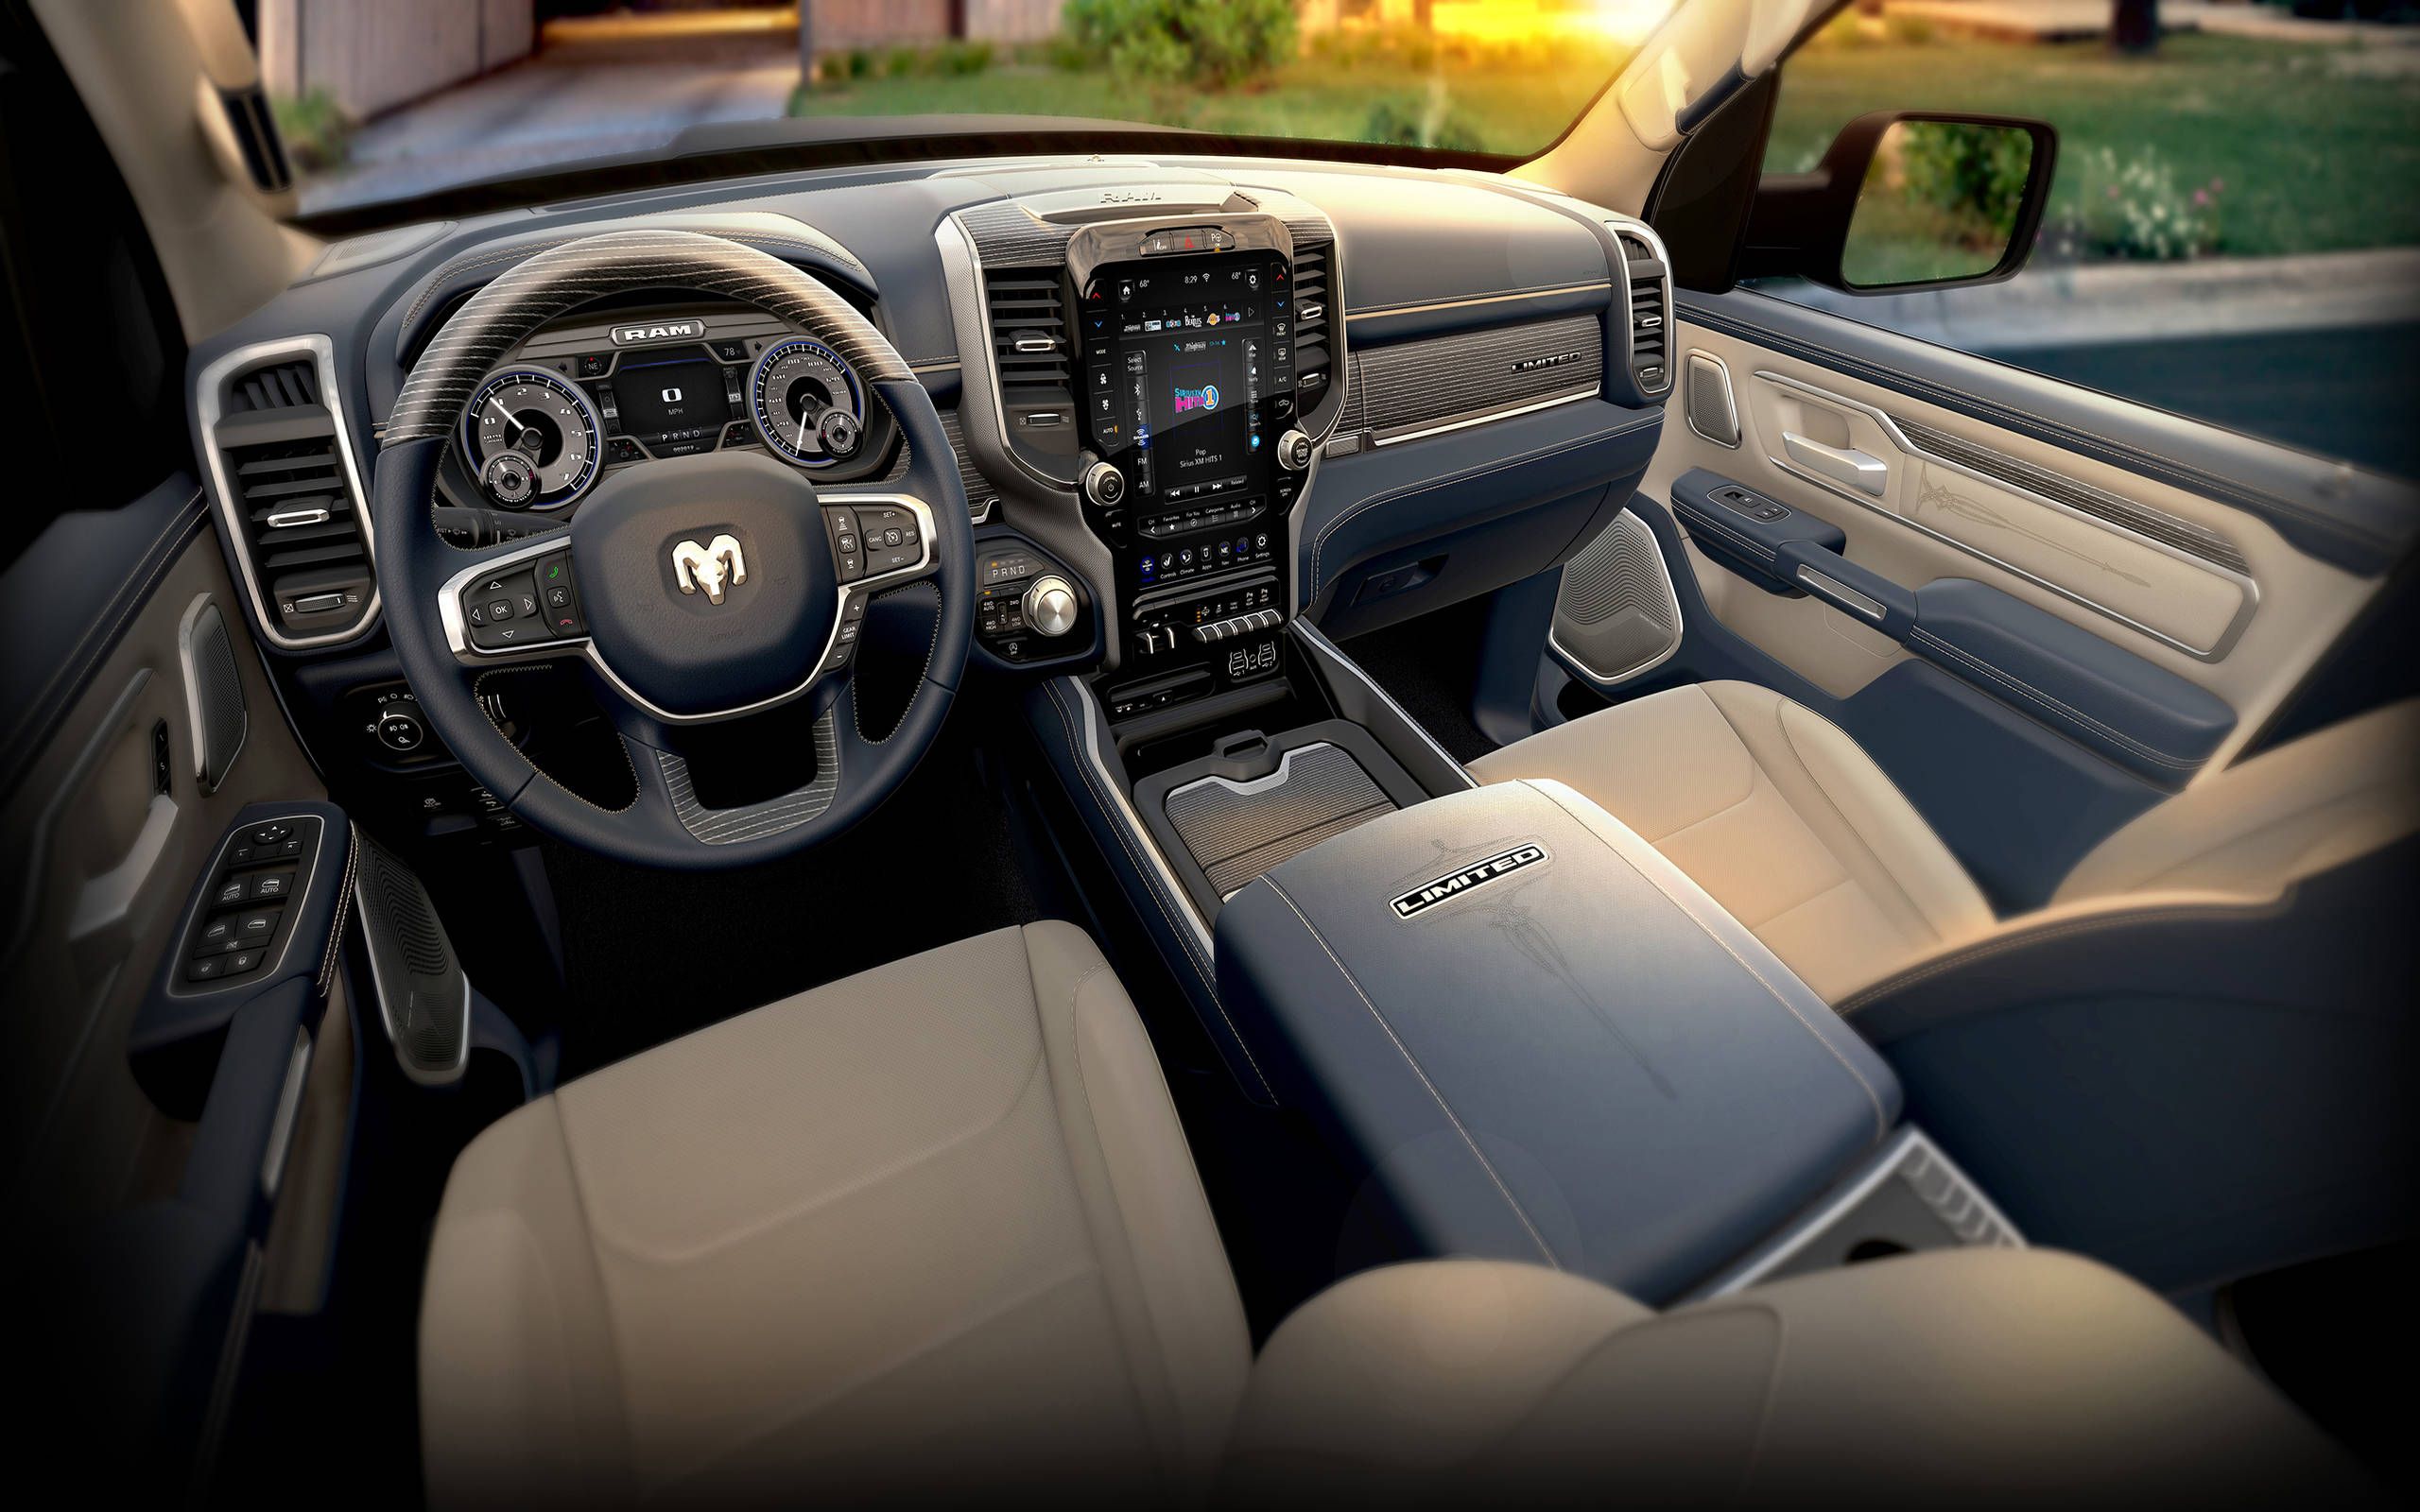 Our 5 2019 Ram interior features